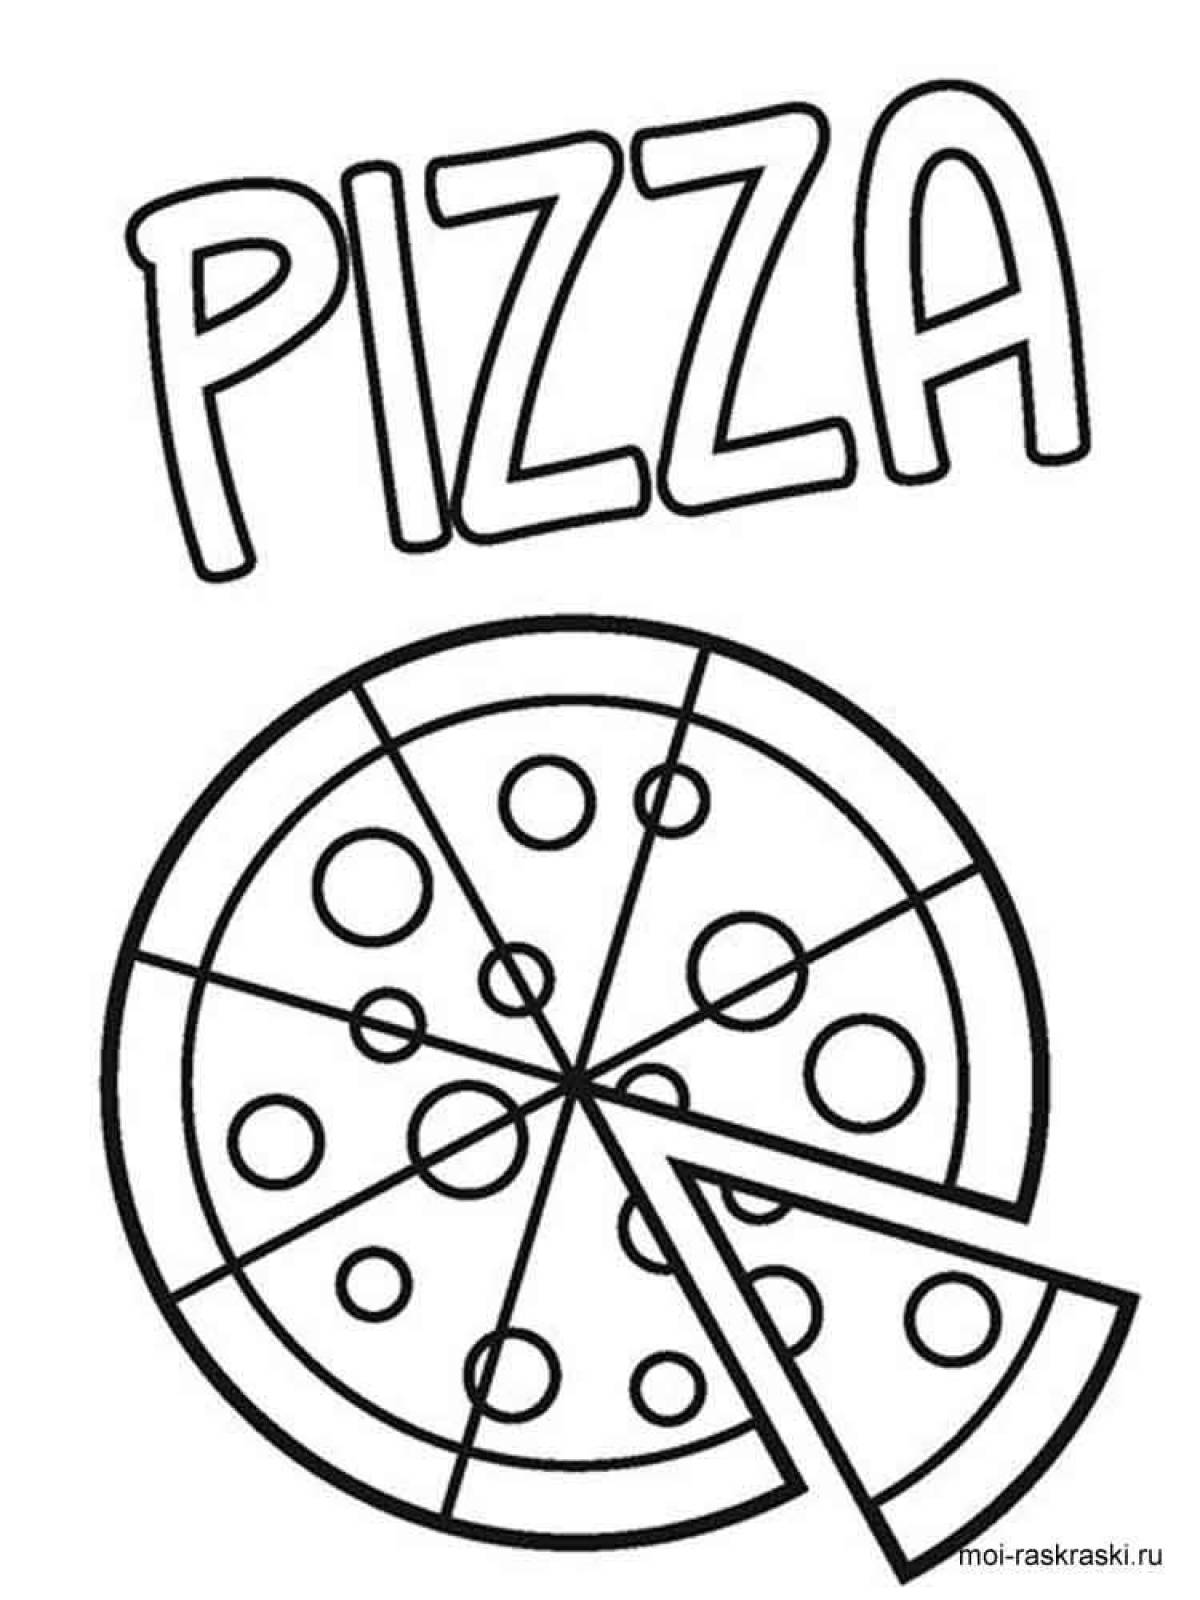 Pizza for kids #13